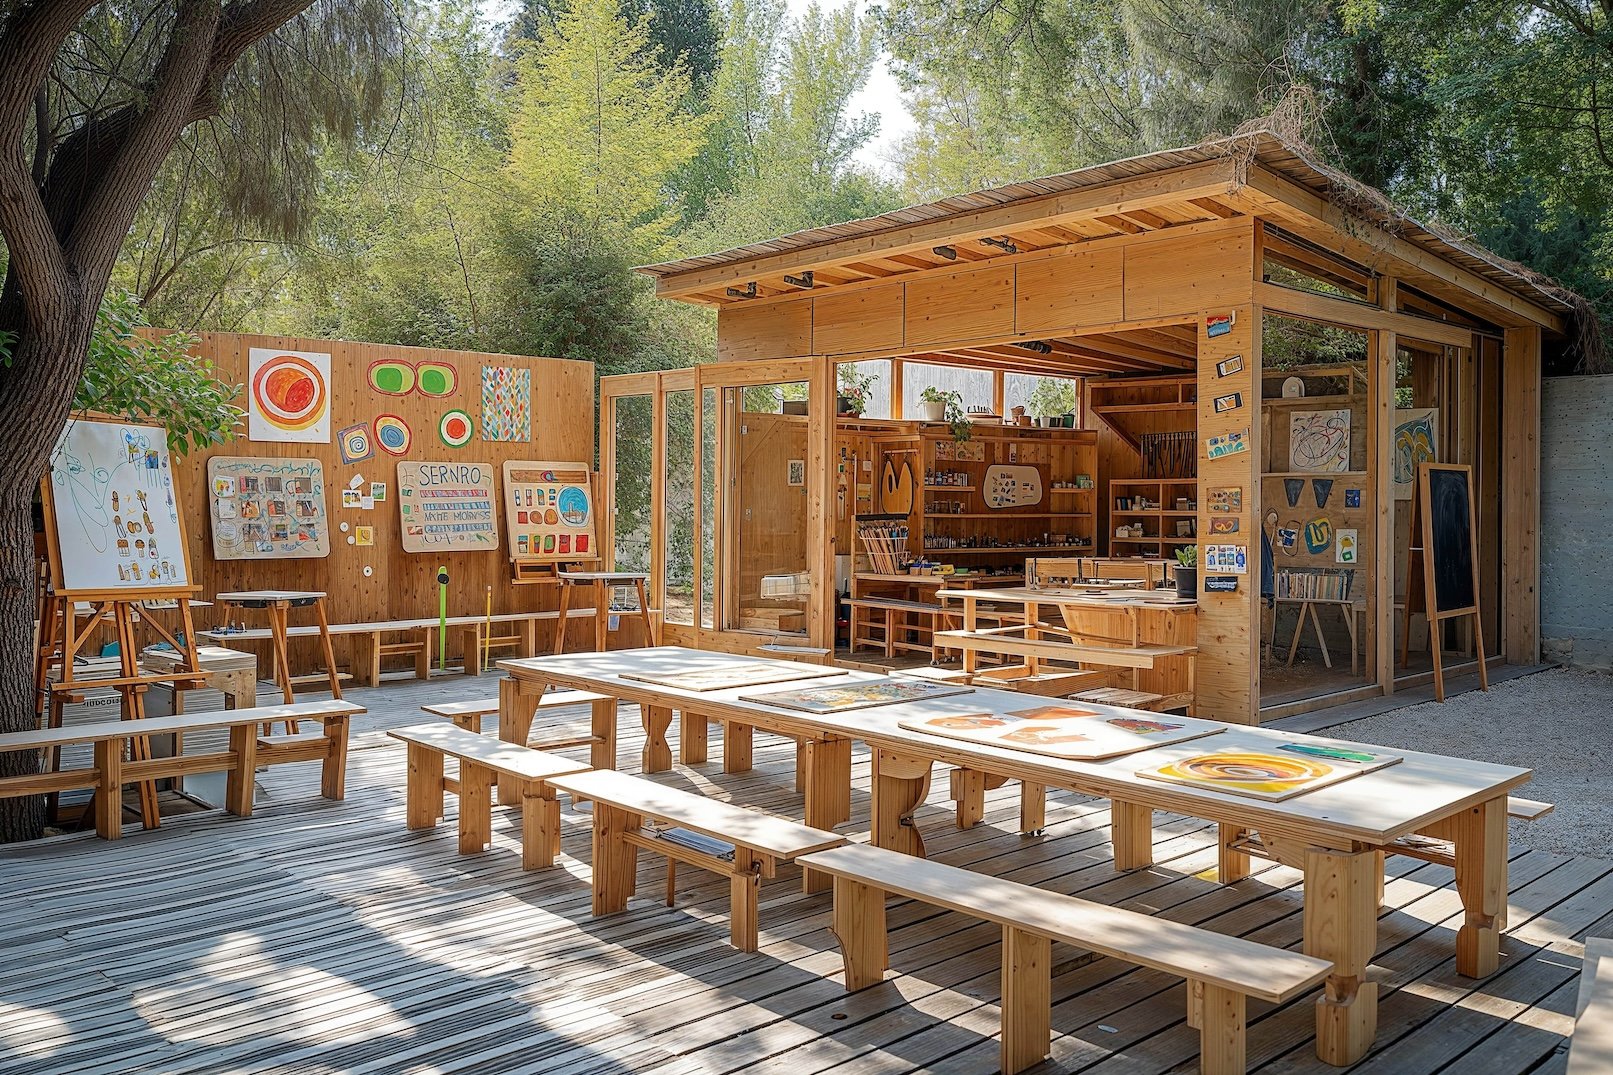 Outdoor children's workshop built with sustainable plywood panels from Melbourne plywood supplier, Plyco